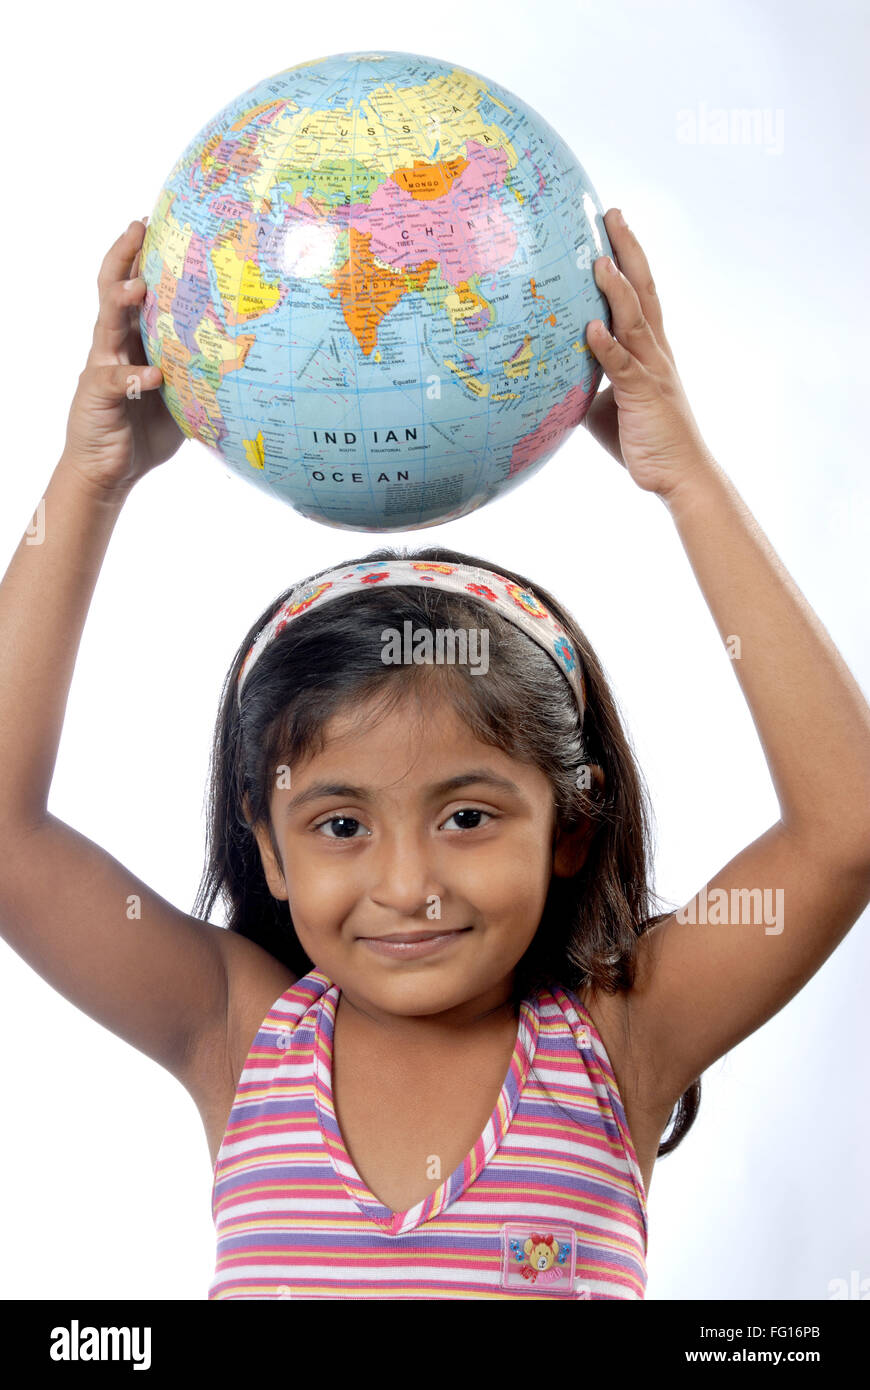 Les Indiens de l'Asie du Sud six year old girl holding globe on head looking at camera MR# 364 Banque D'Images